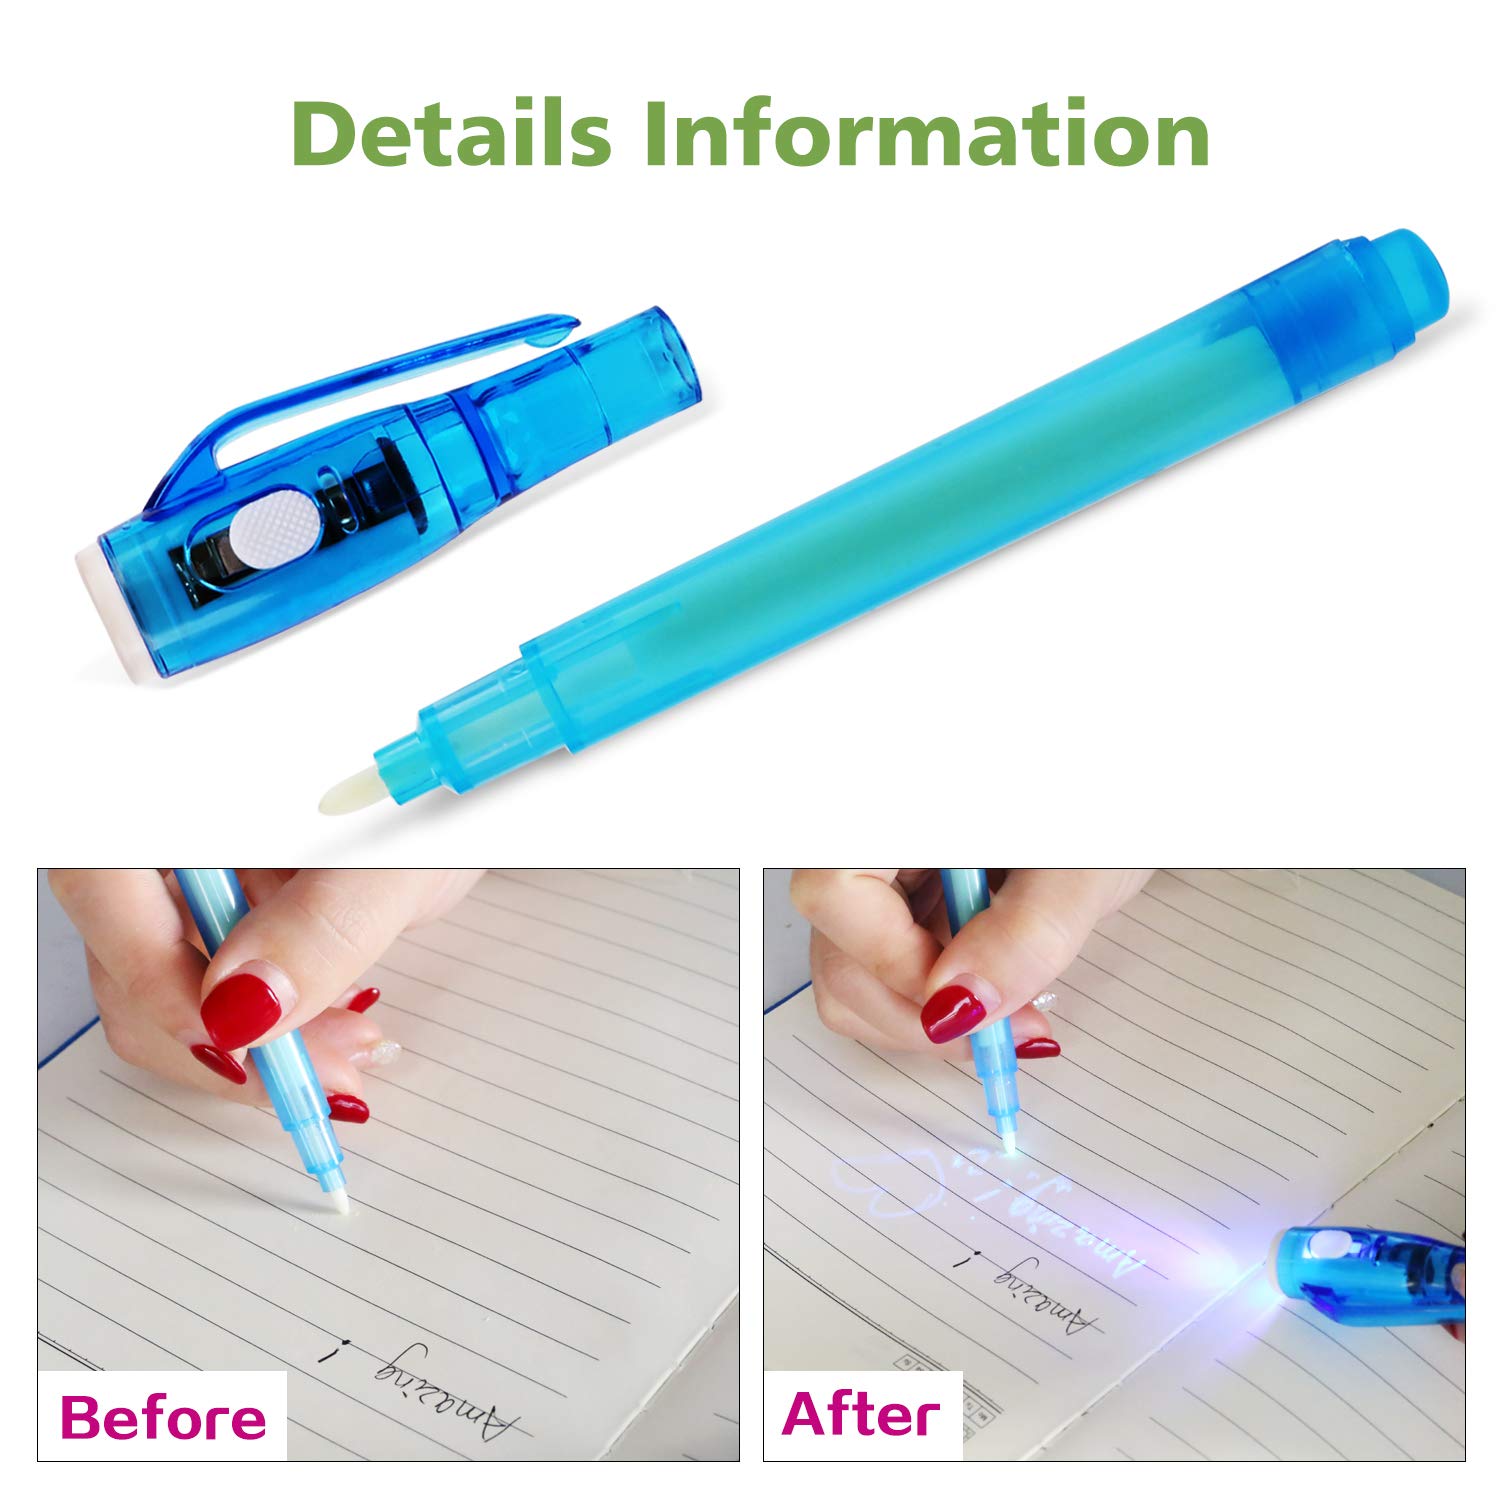 FLYOME 4 Pack Invisible Ink Pens with uv Light, 2021 Upgraded Disappearing Spy Pens for Party Favors, Christmas, Thanks Giving Day, Magic Marker for Secret Message and Goodies Bags Toy